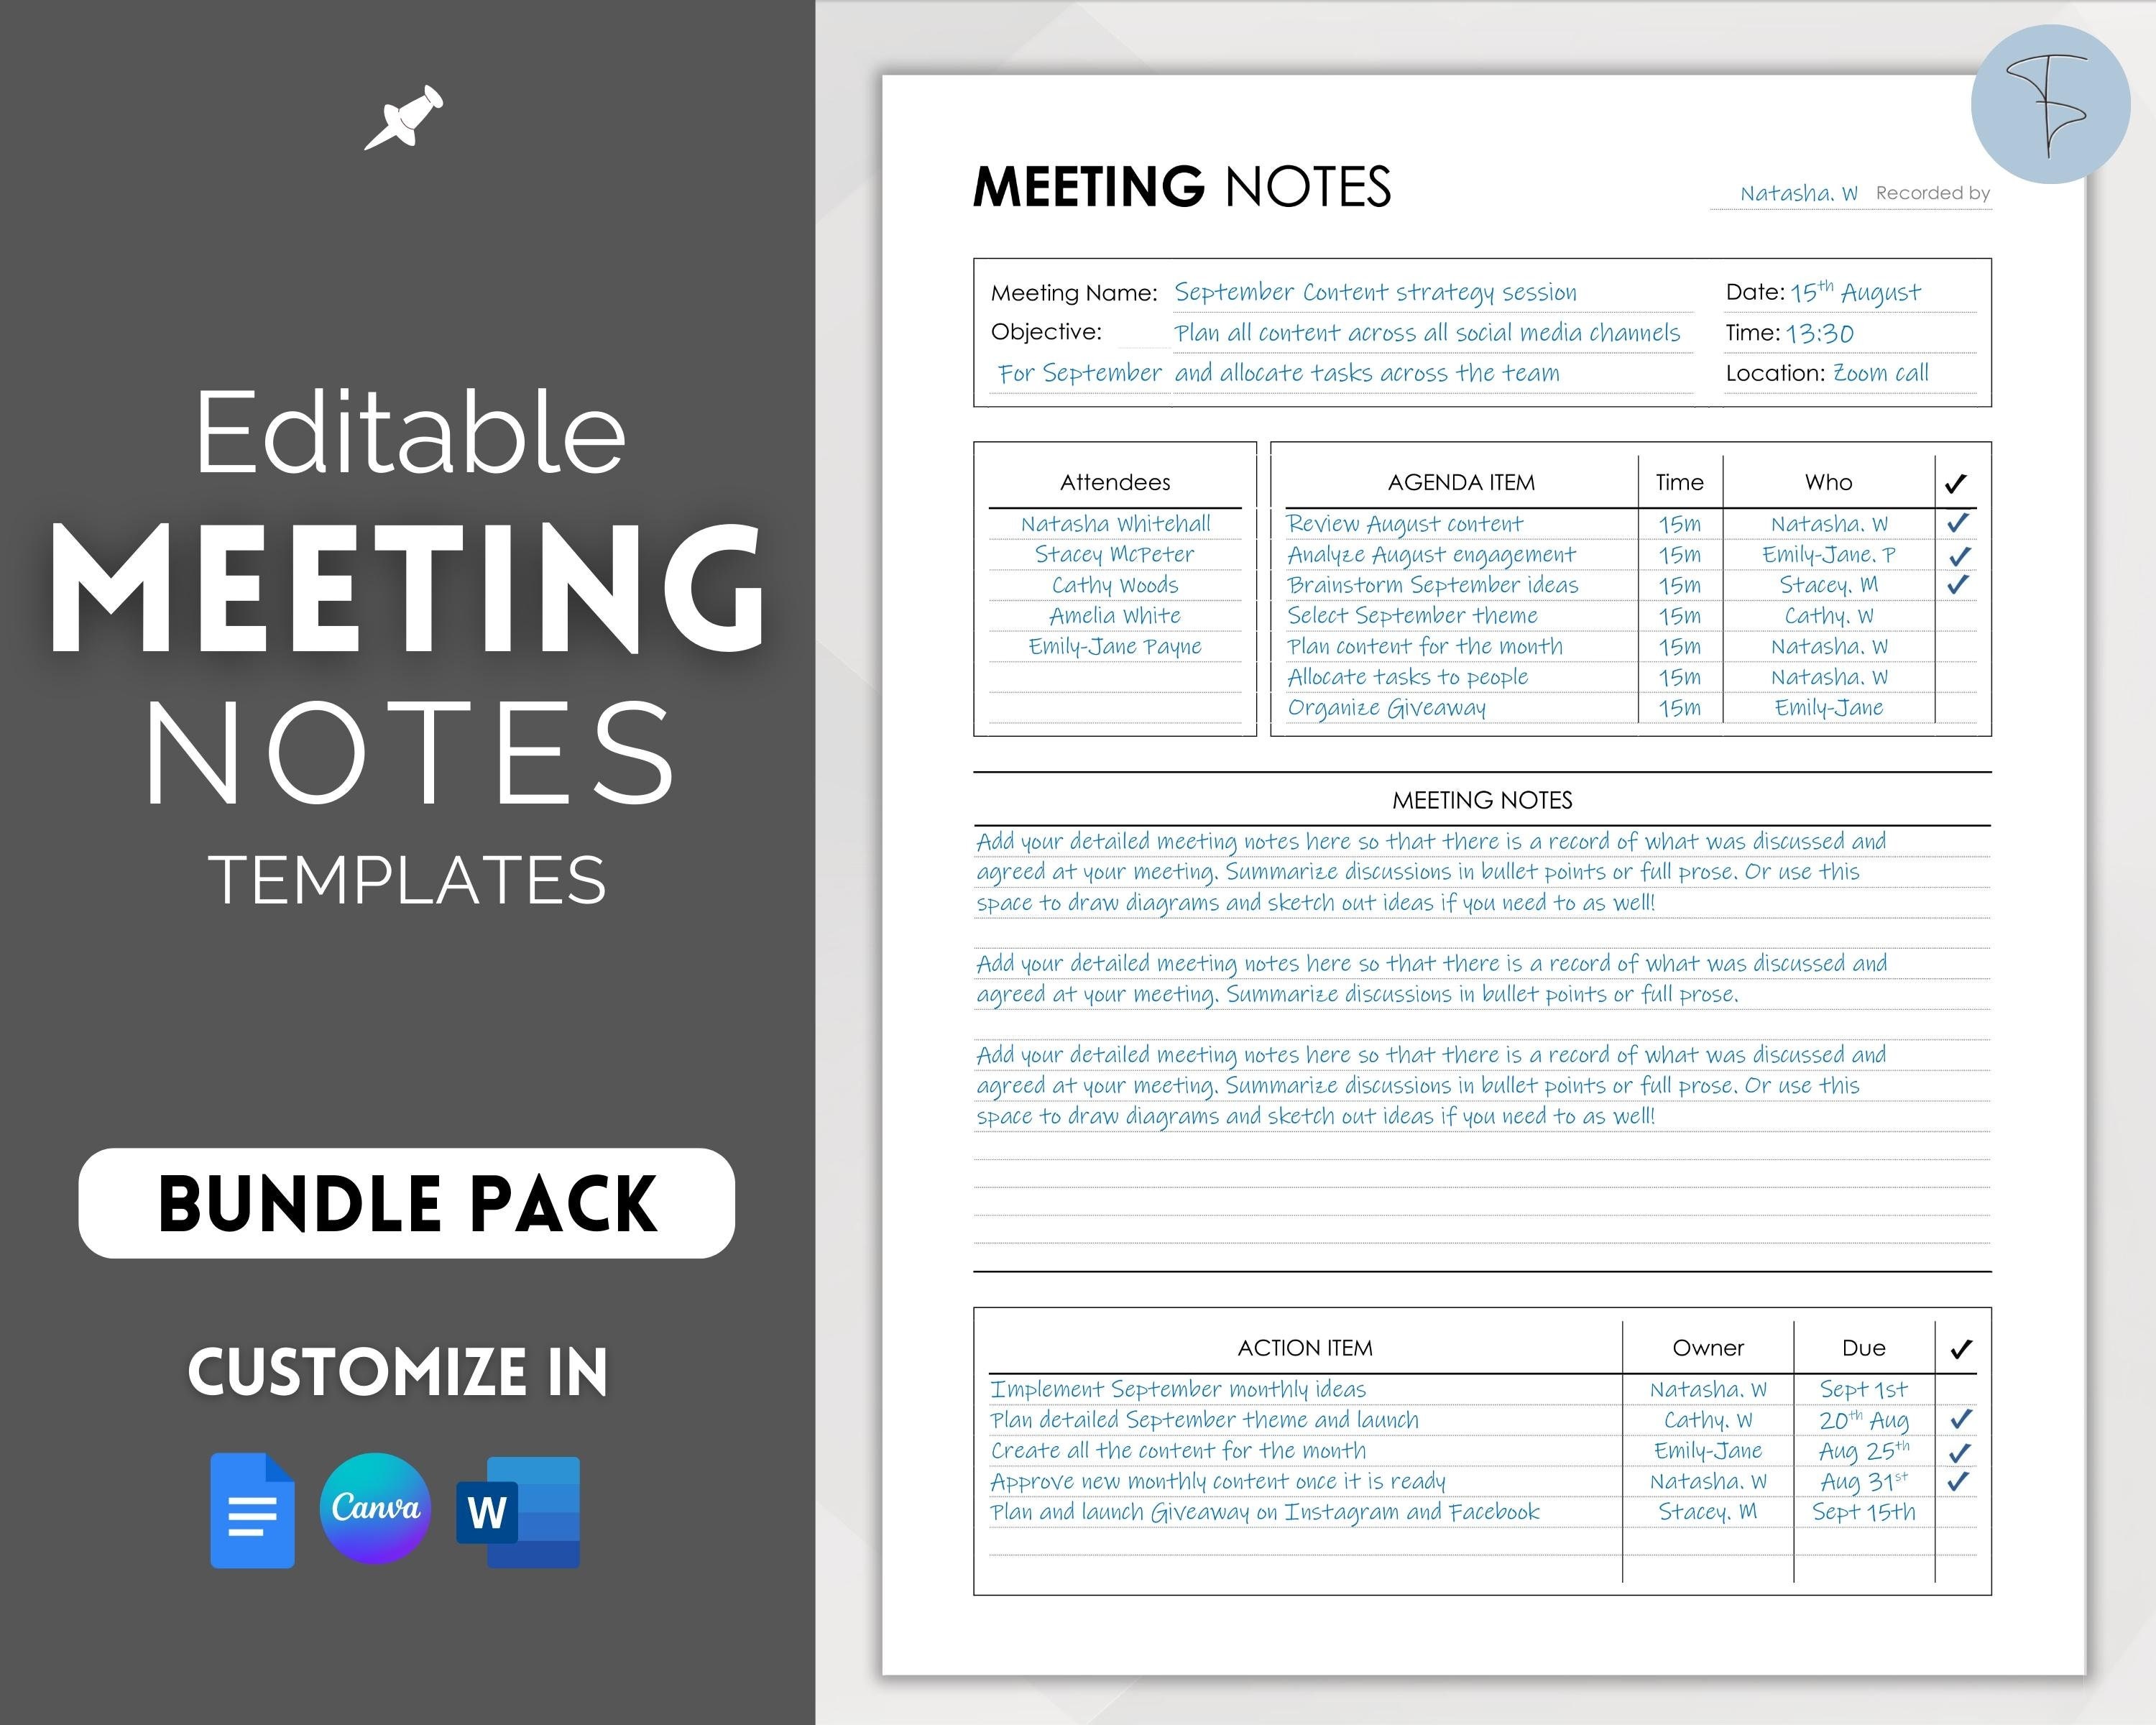 The Ultimate Couples Meeting Toolkit - Editable pdf - Meeting